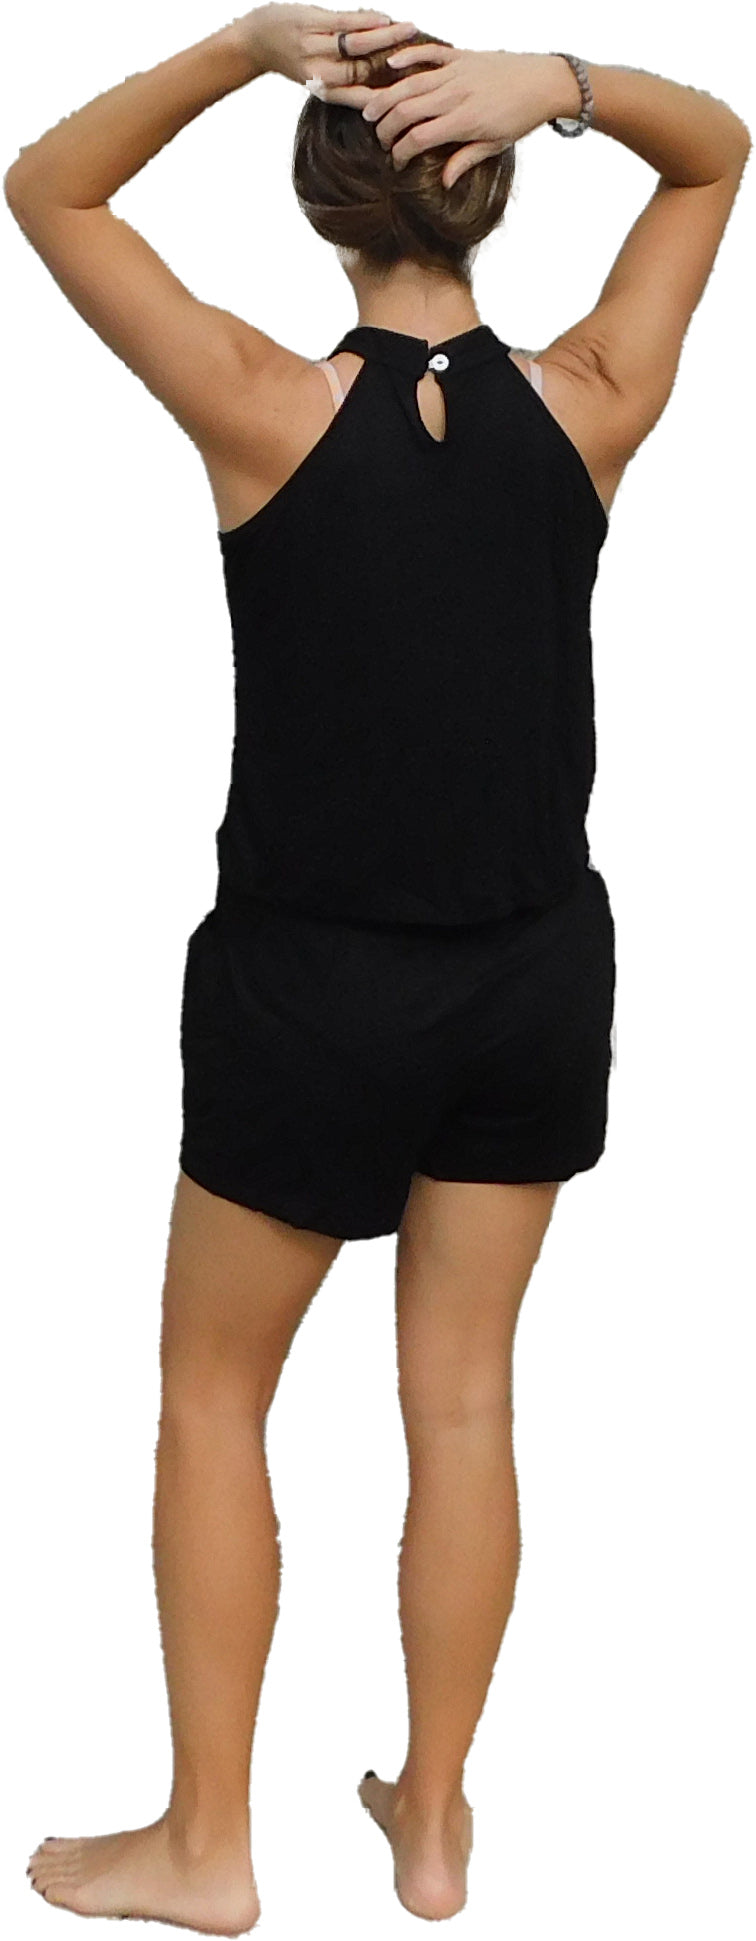 a woman in black shorts and a tank top